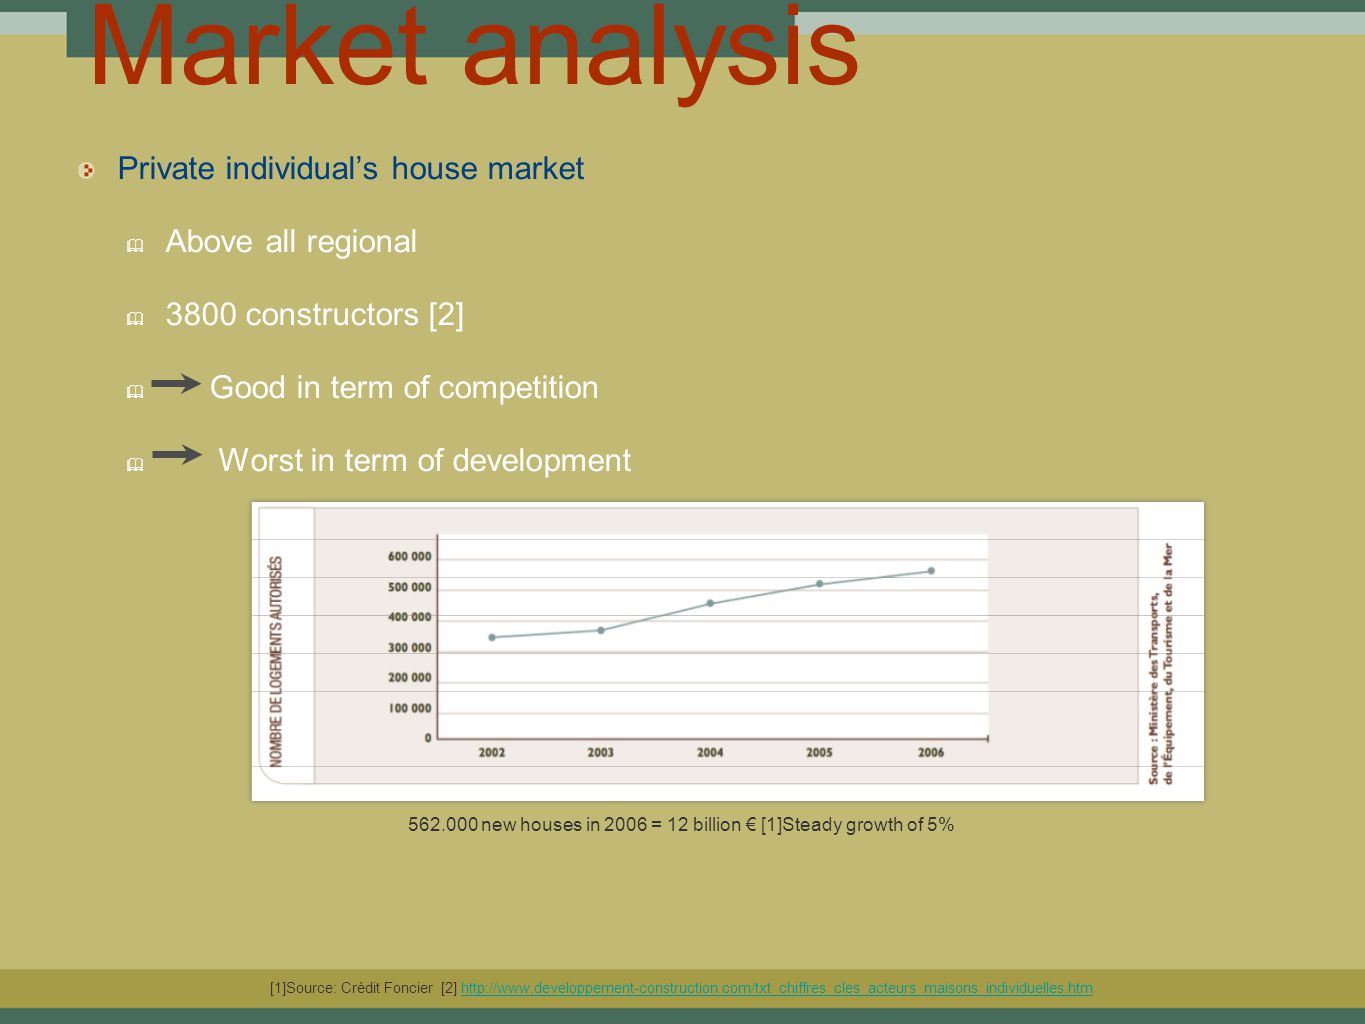 Market analysis Private individual’s house market ✦ Above all regional ✦ 3800 constructors [2] ✦ Good in term of competition ✦ Worst in term of development new houses in 2006 = 12 billion € [1]Steady growth of 5% [1]Source: Crédit Foncier [2]